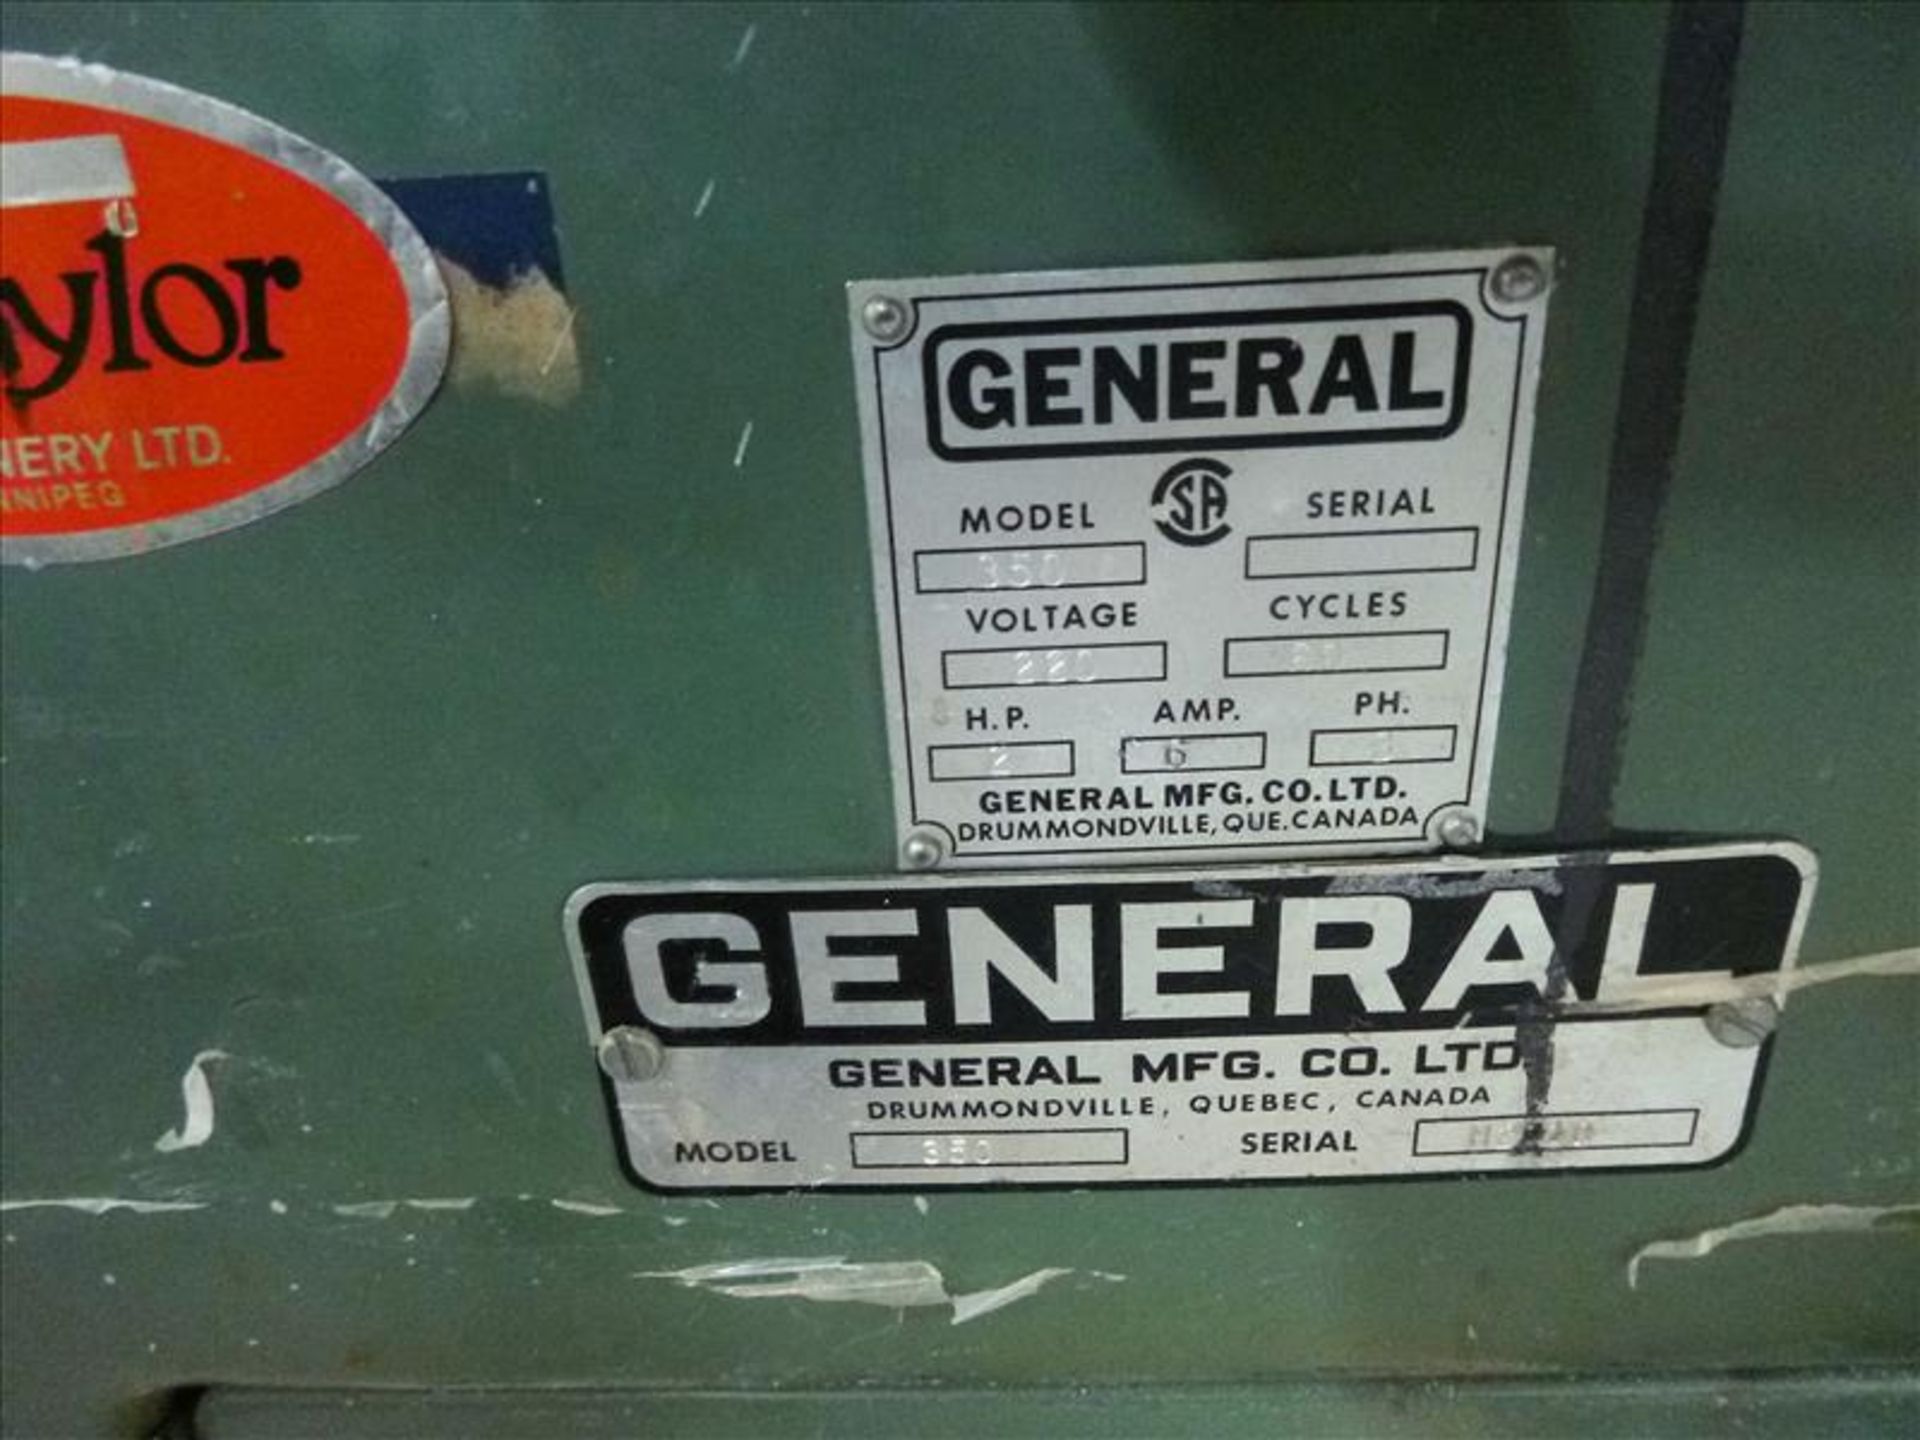 General table saw, mod. 350, ser. no. M2710 - Image 2 of 2